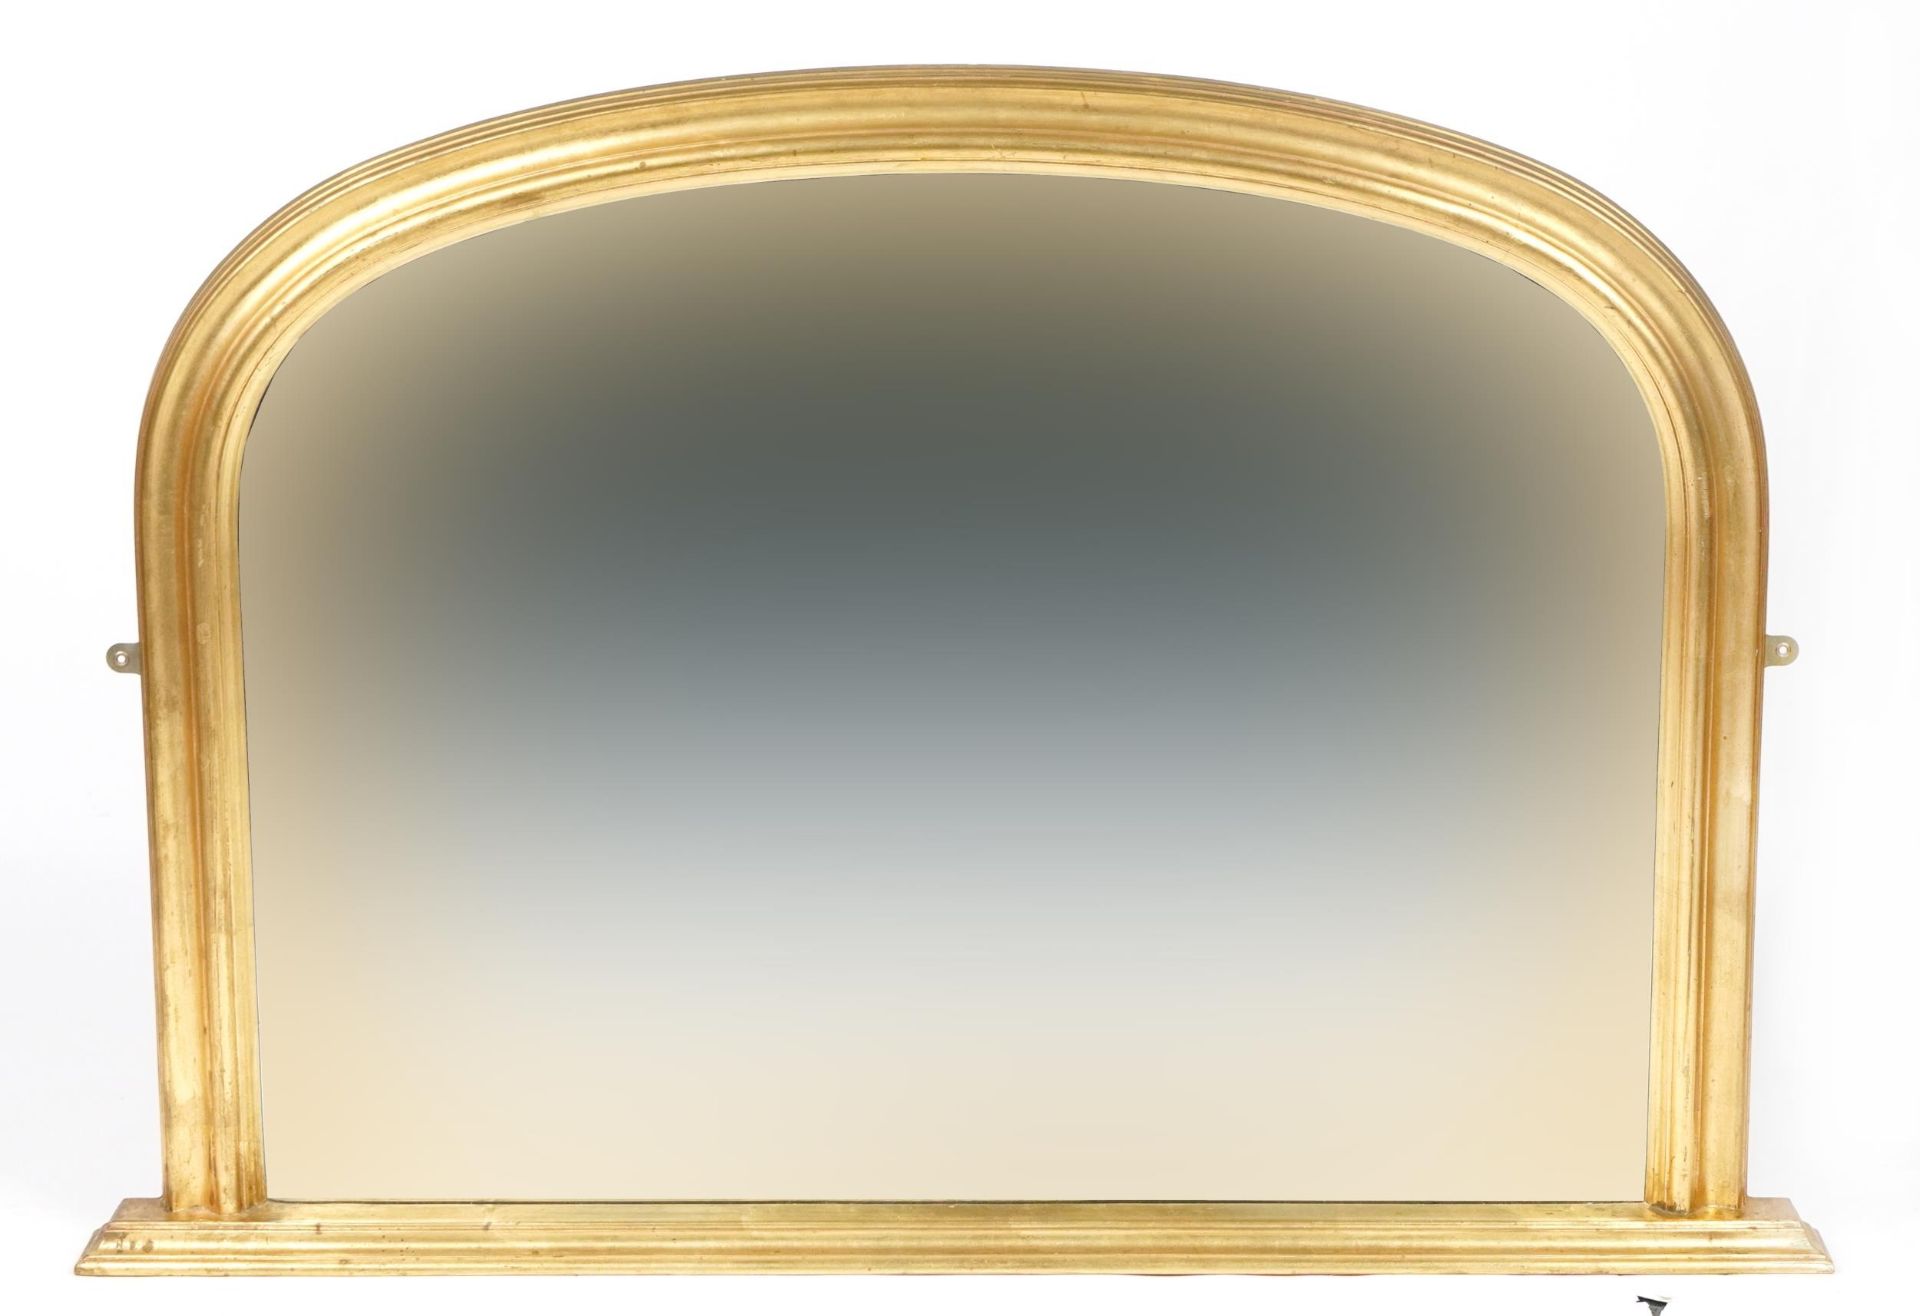 Gilt framed overmantle mirror, 107cm x 74cm : For further information on this lot please visit